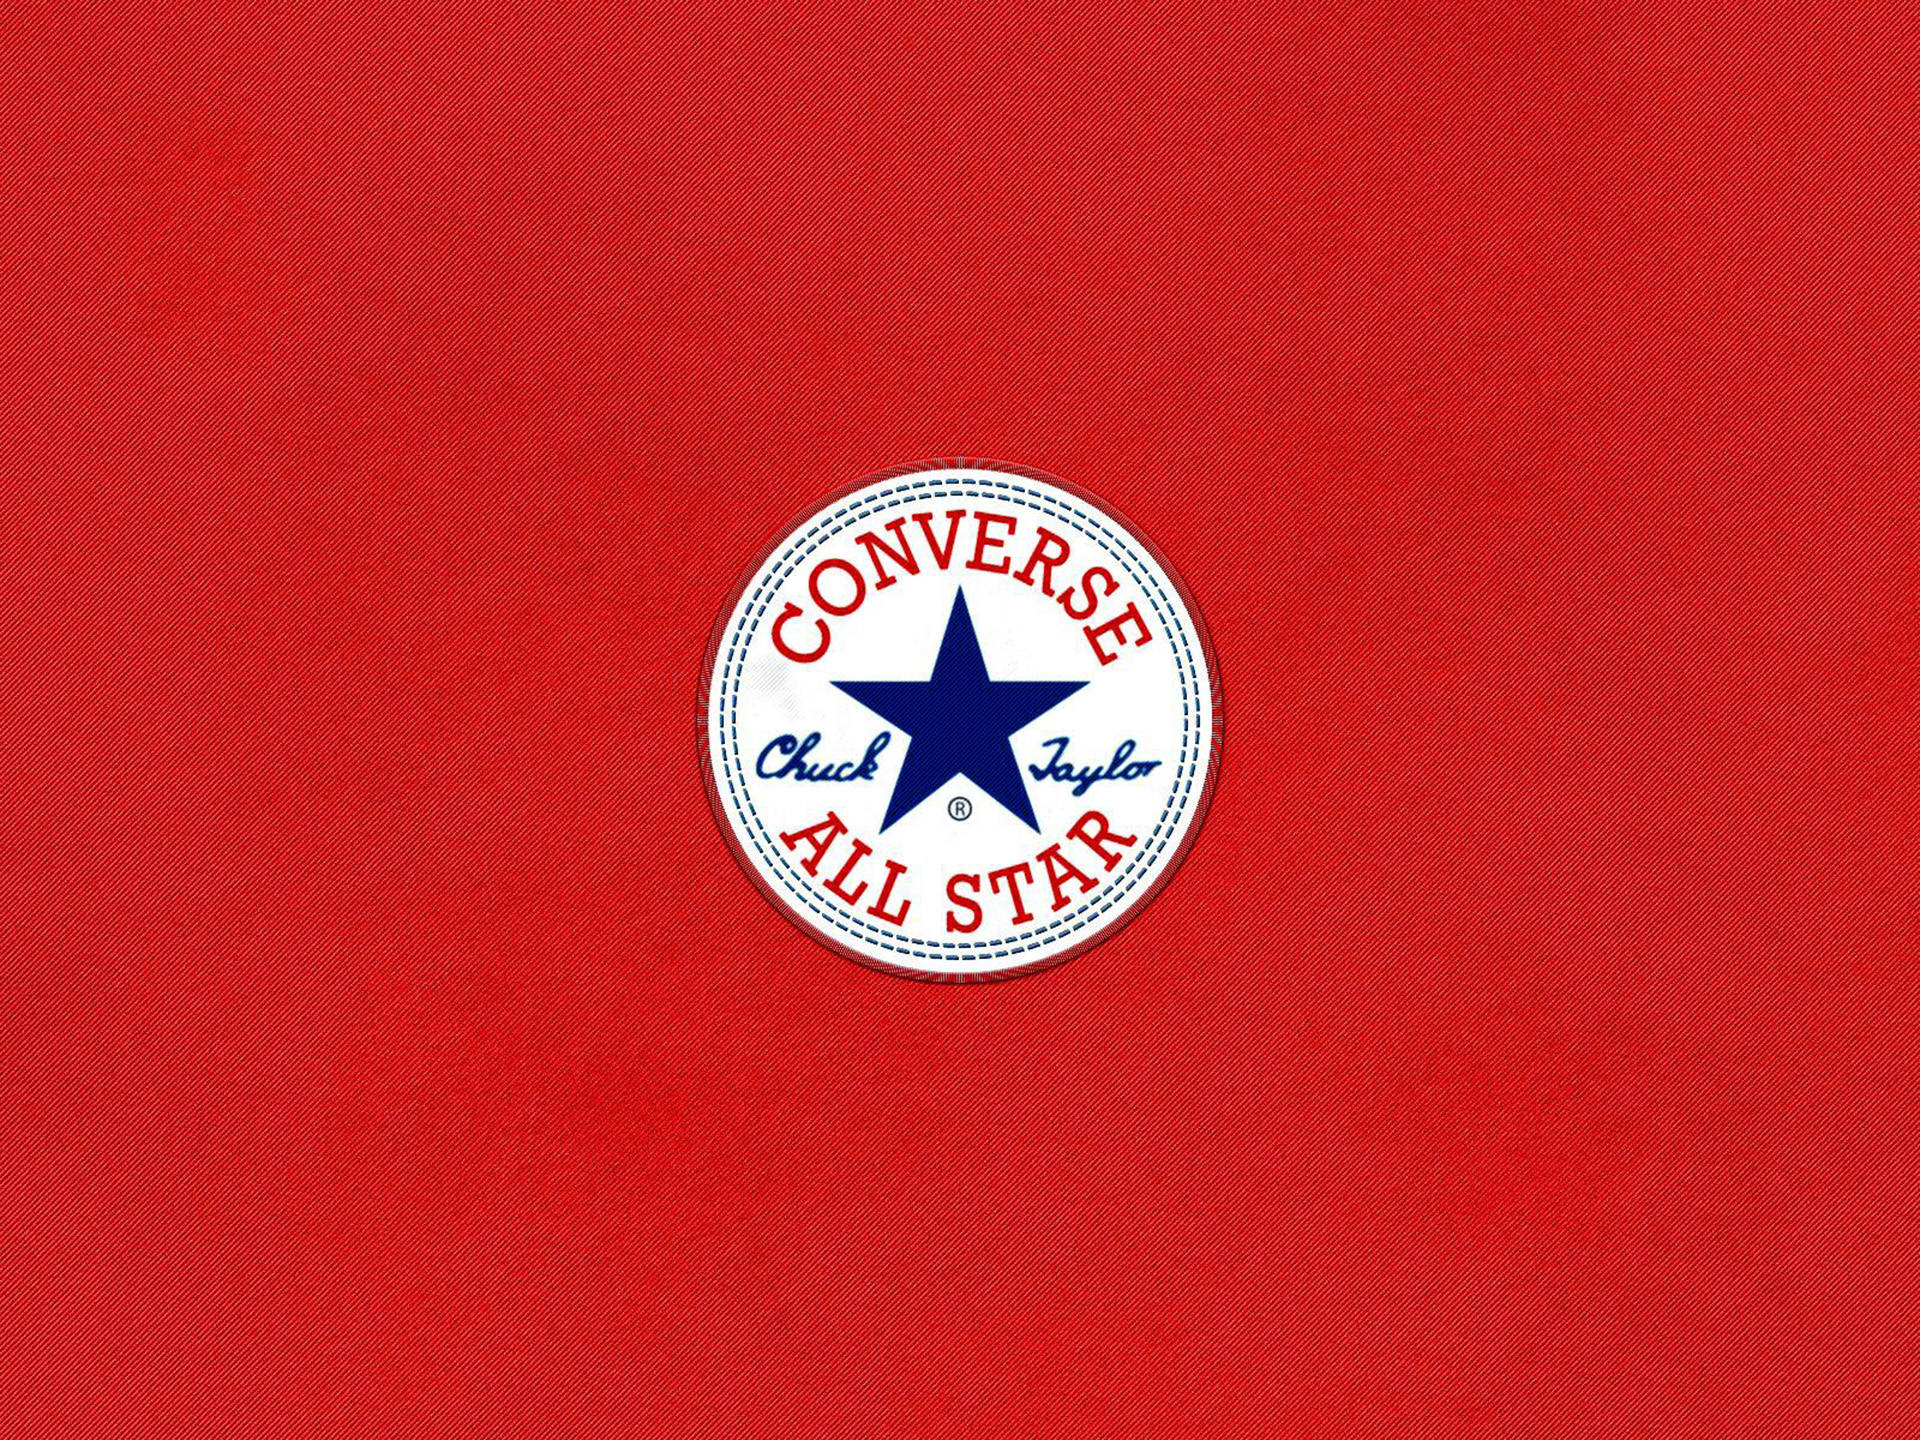 Converse Logo On Red Background